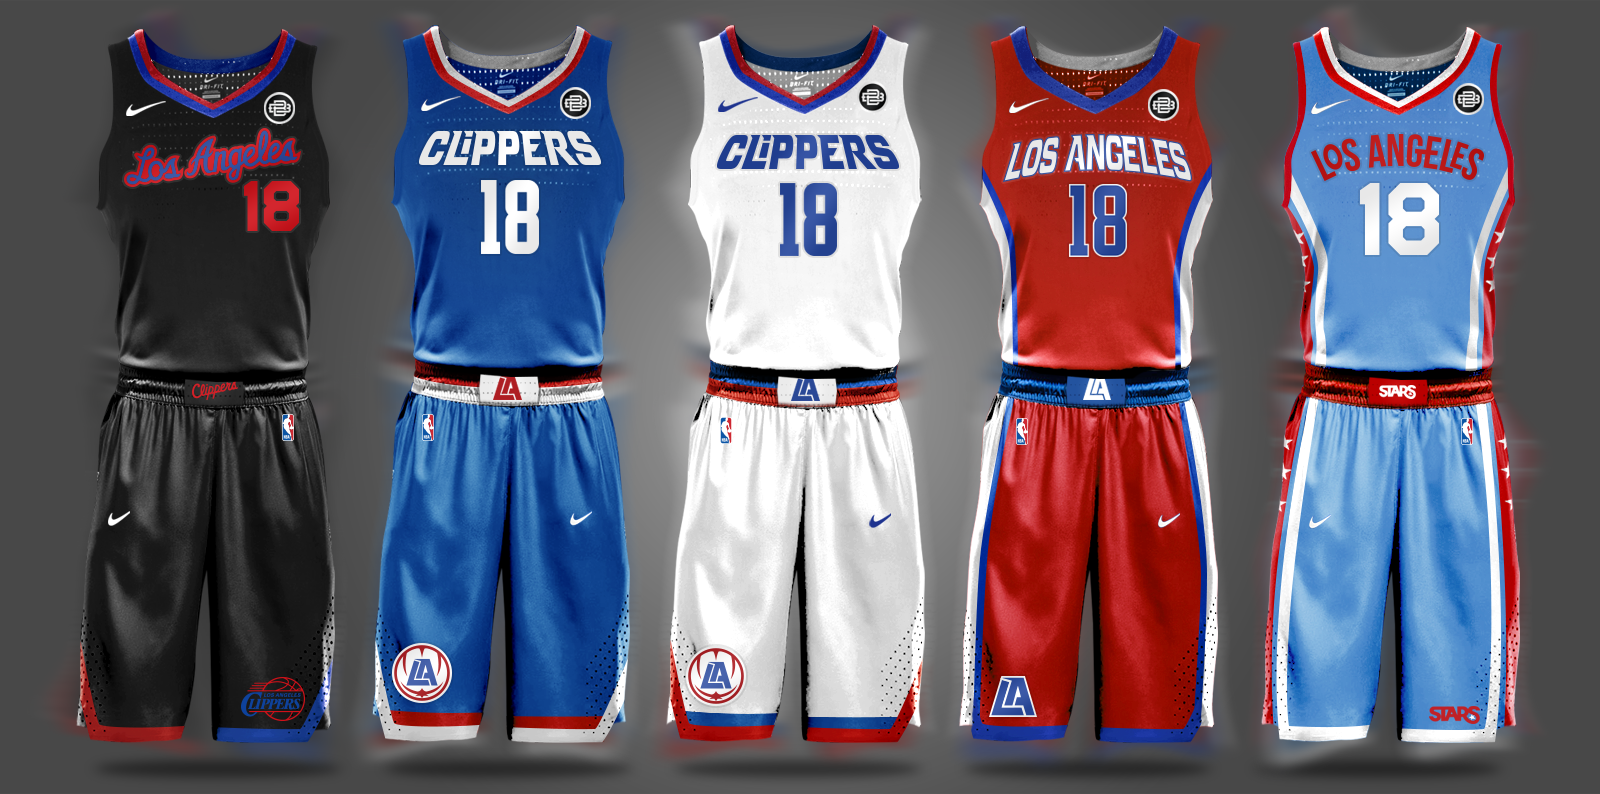 la clippers new jersey 2020